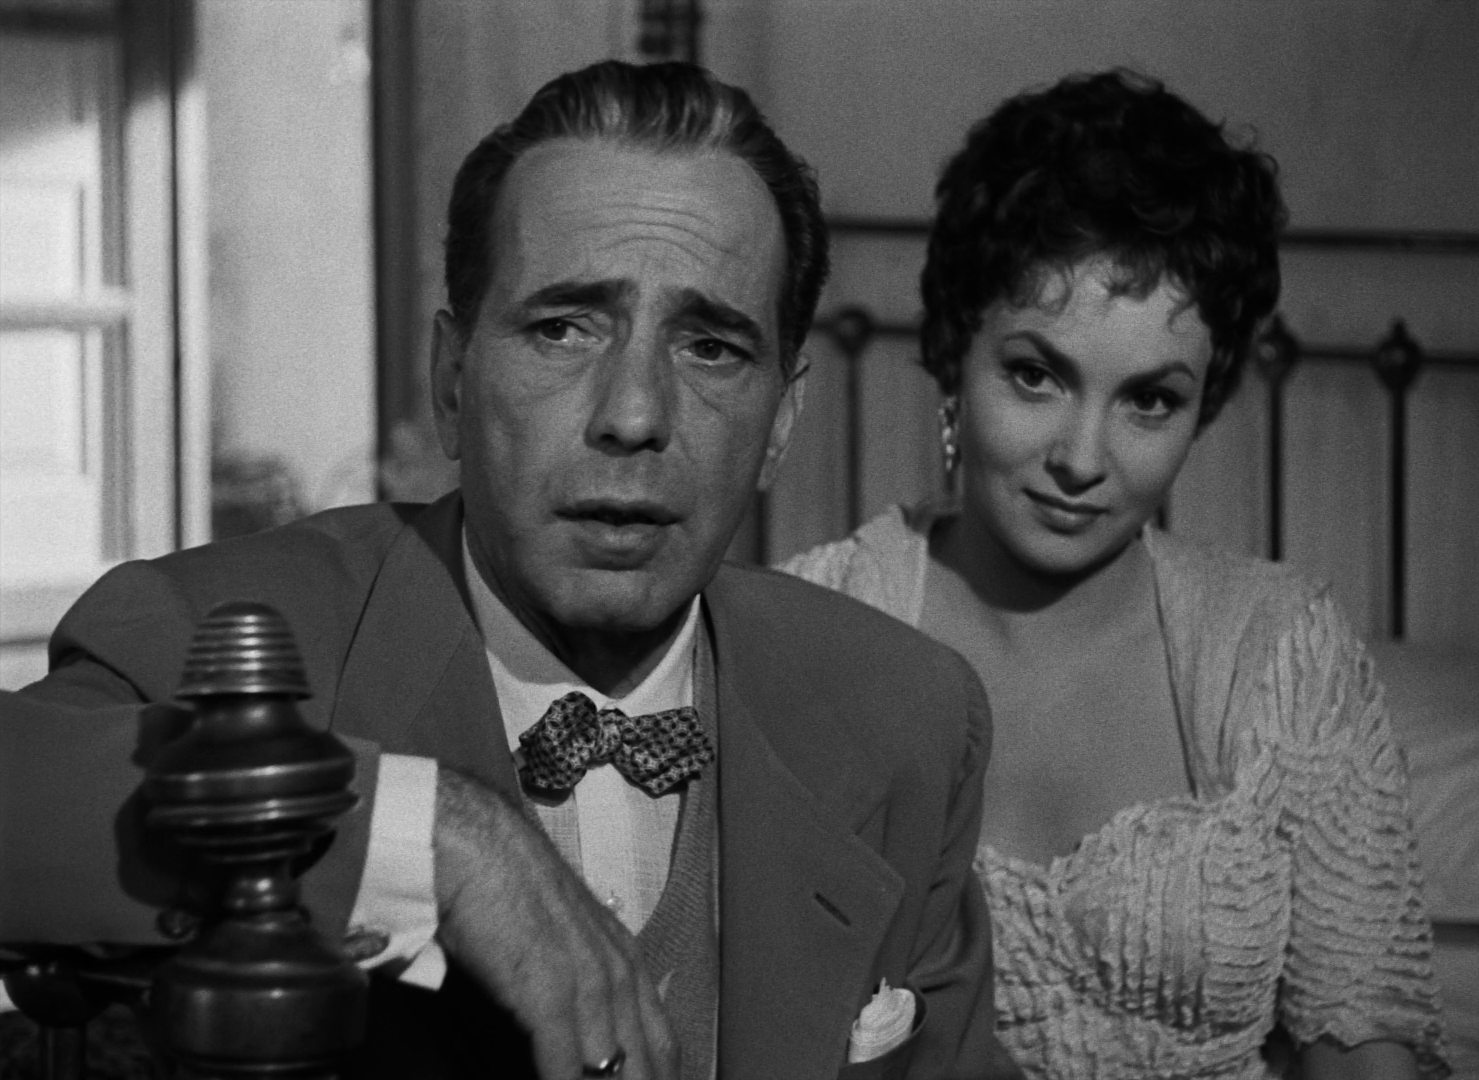 Black and white close-up of Humphrey Bogart and Gina Lollobrigida: both sitting on a hotel bed, elegantly dressed, with attentive looks.